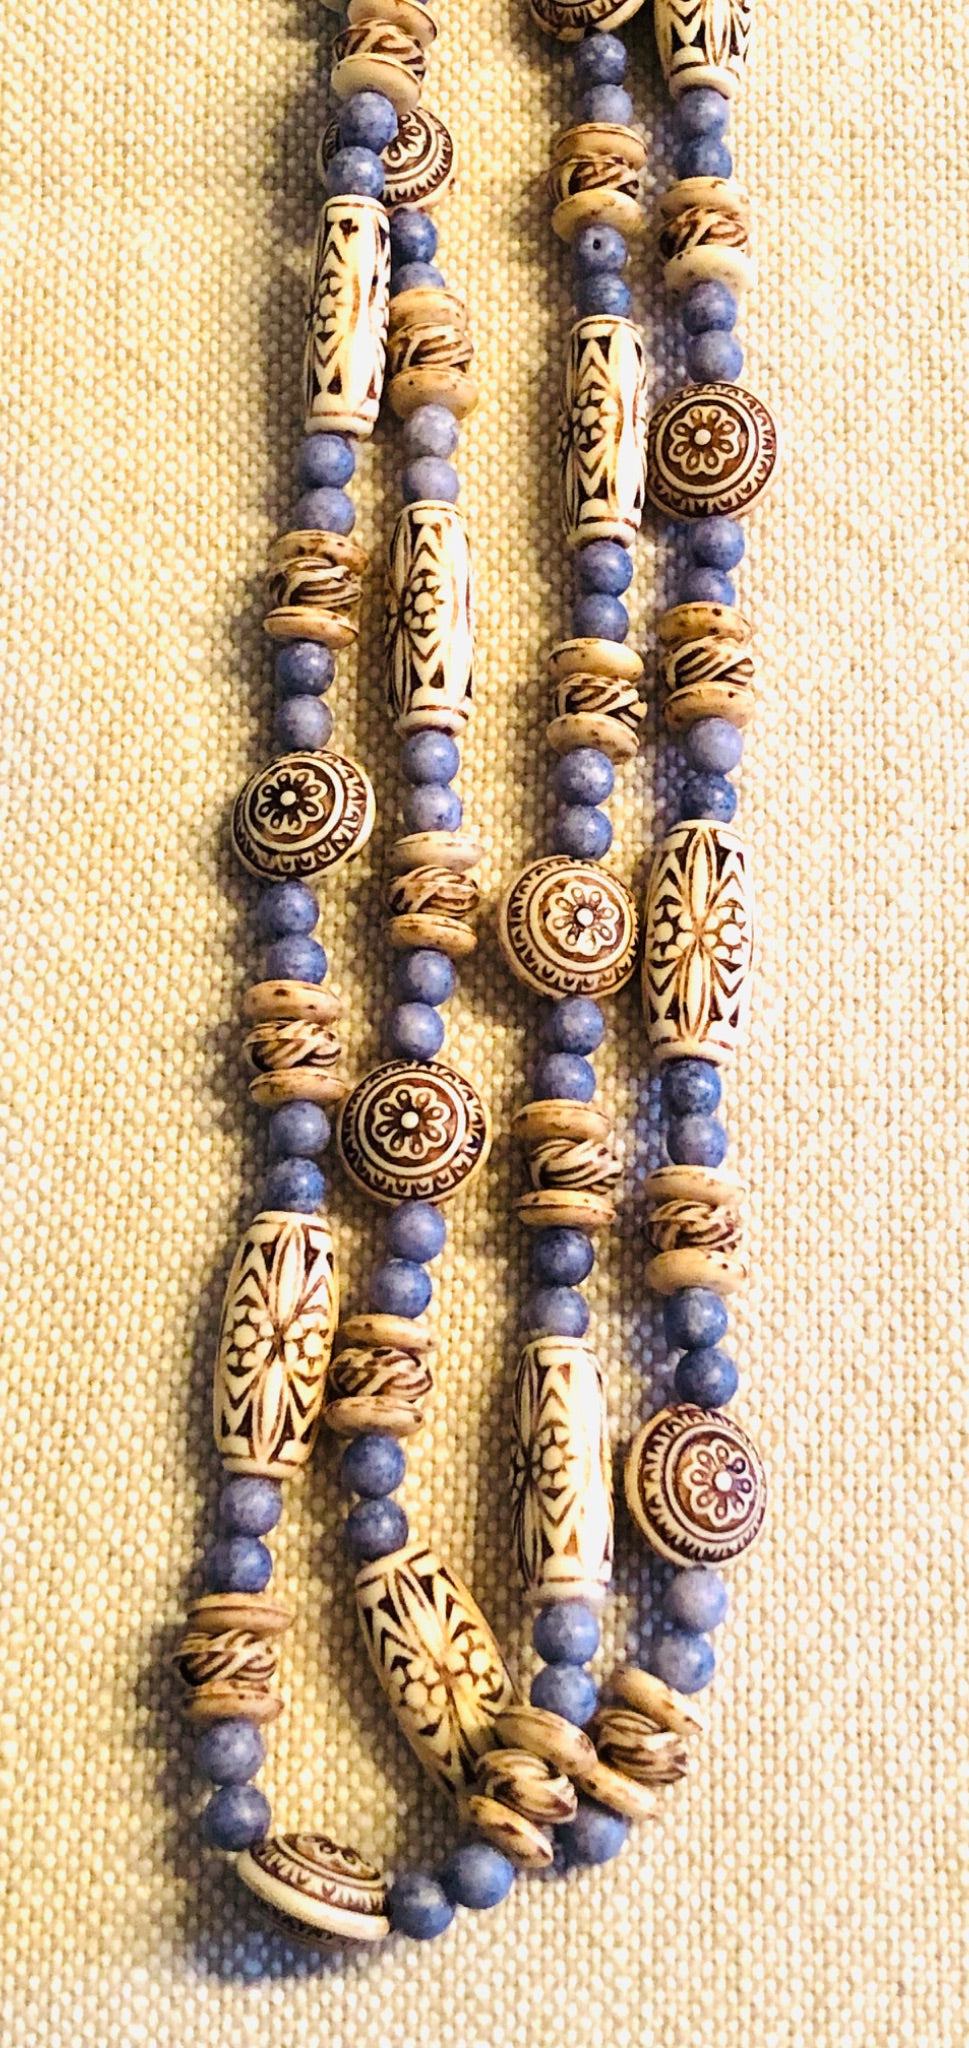 015-153 Blue Beads w Carved Bead Strand - 1